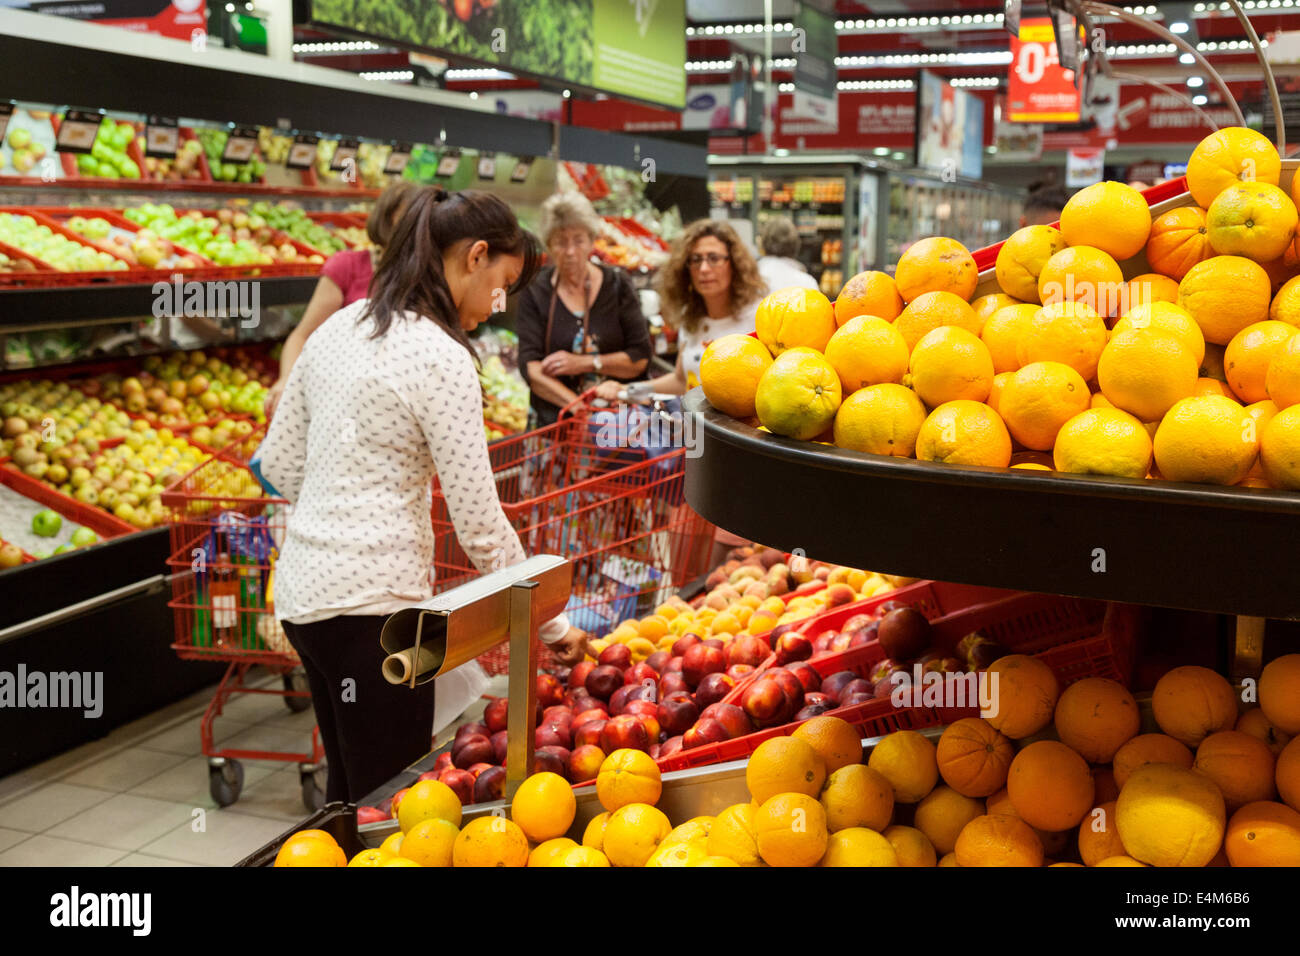 People buying food and fruit, inside a supermarket, Lagoa, Algarve, Portugal Stock Photo